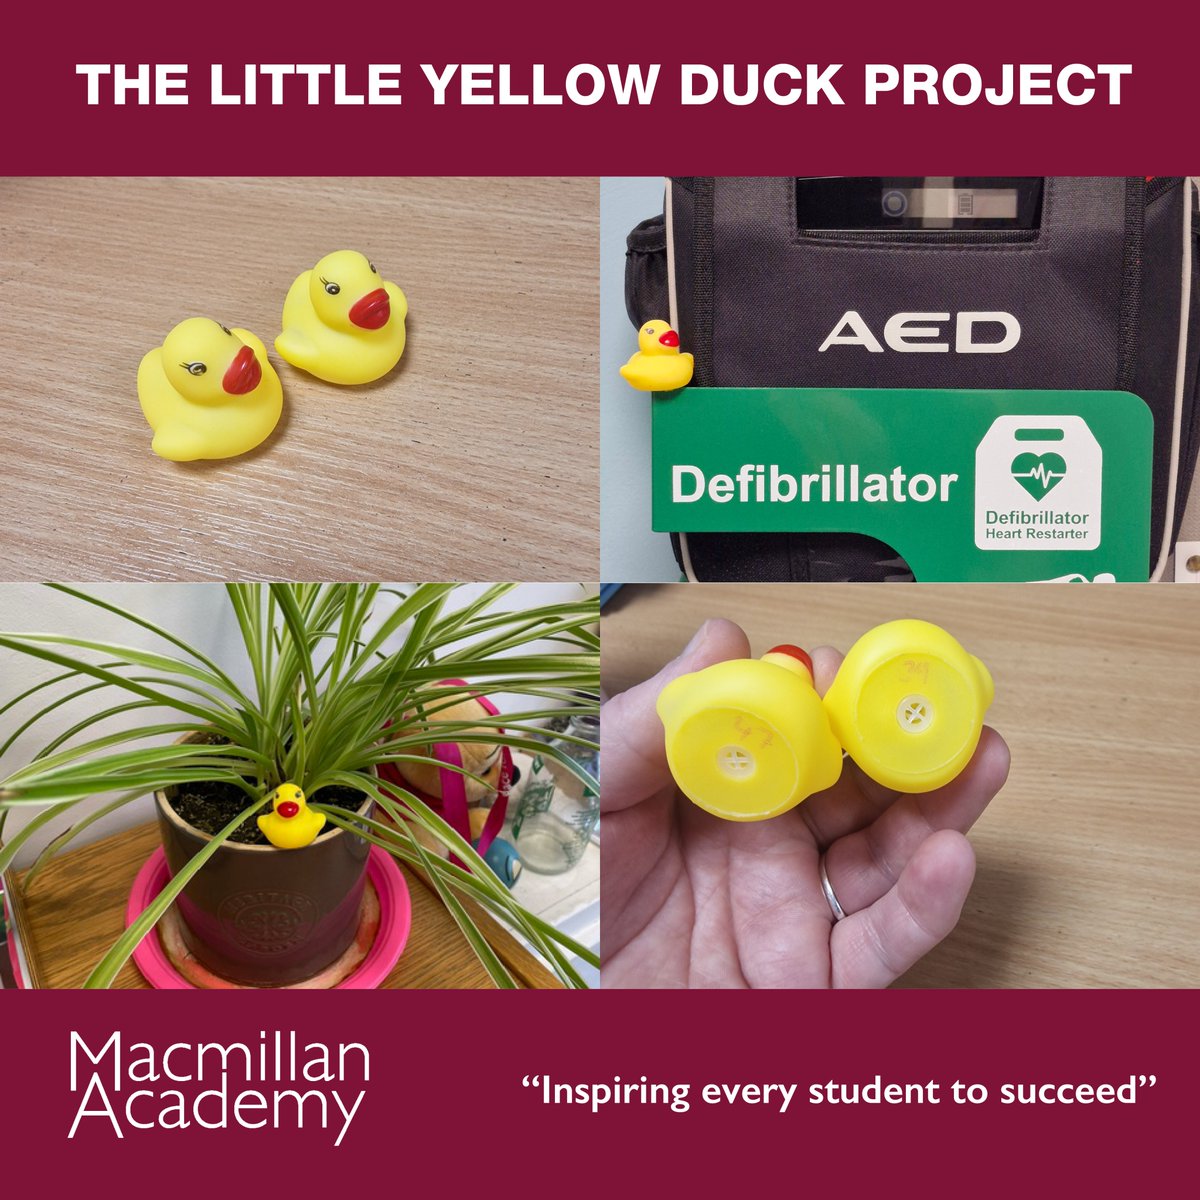 Our staff today went on the hunt! 50 little ducks have been hiding in the academy as part of a global awareness campaign. Let's spread the word about the importance of blood, bone marrow, and organ donation.